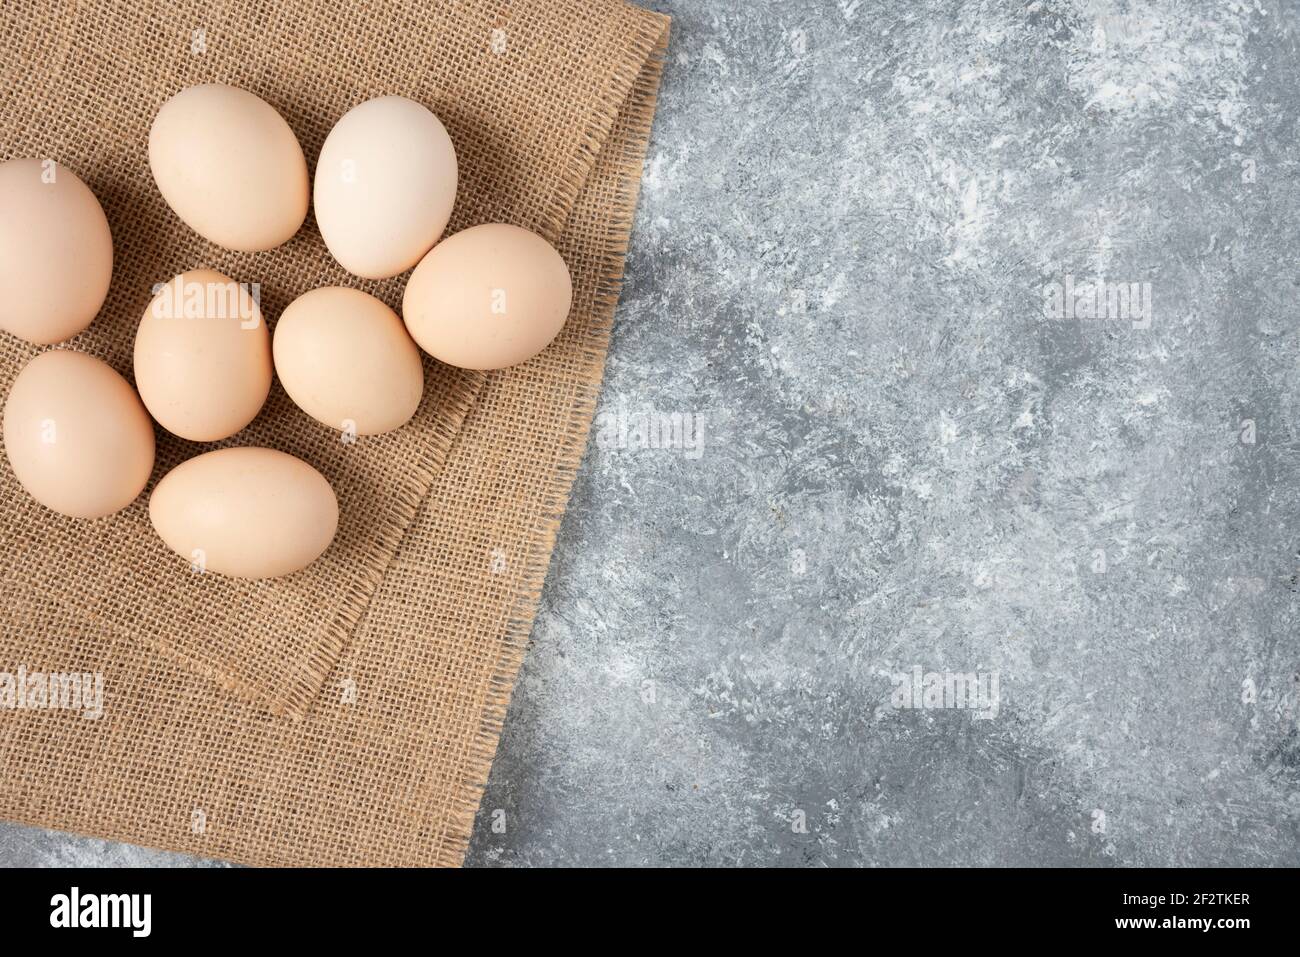 Raw organic eggs placed on top of sackcloth on marble background Stock Photo